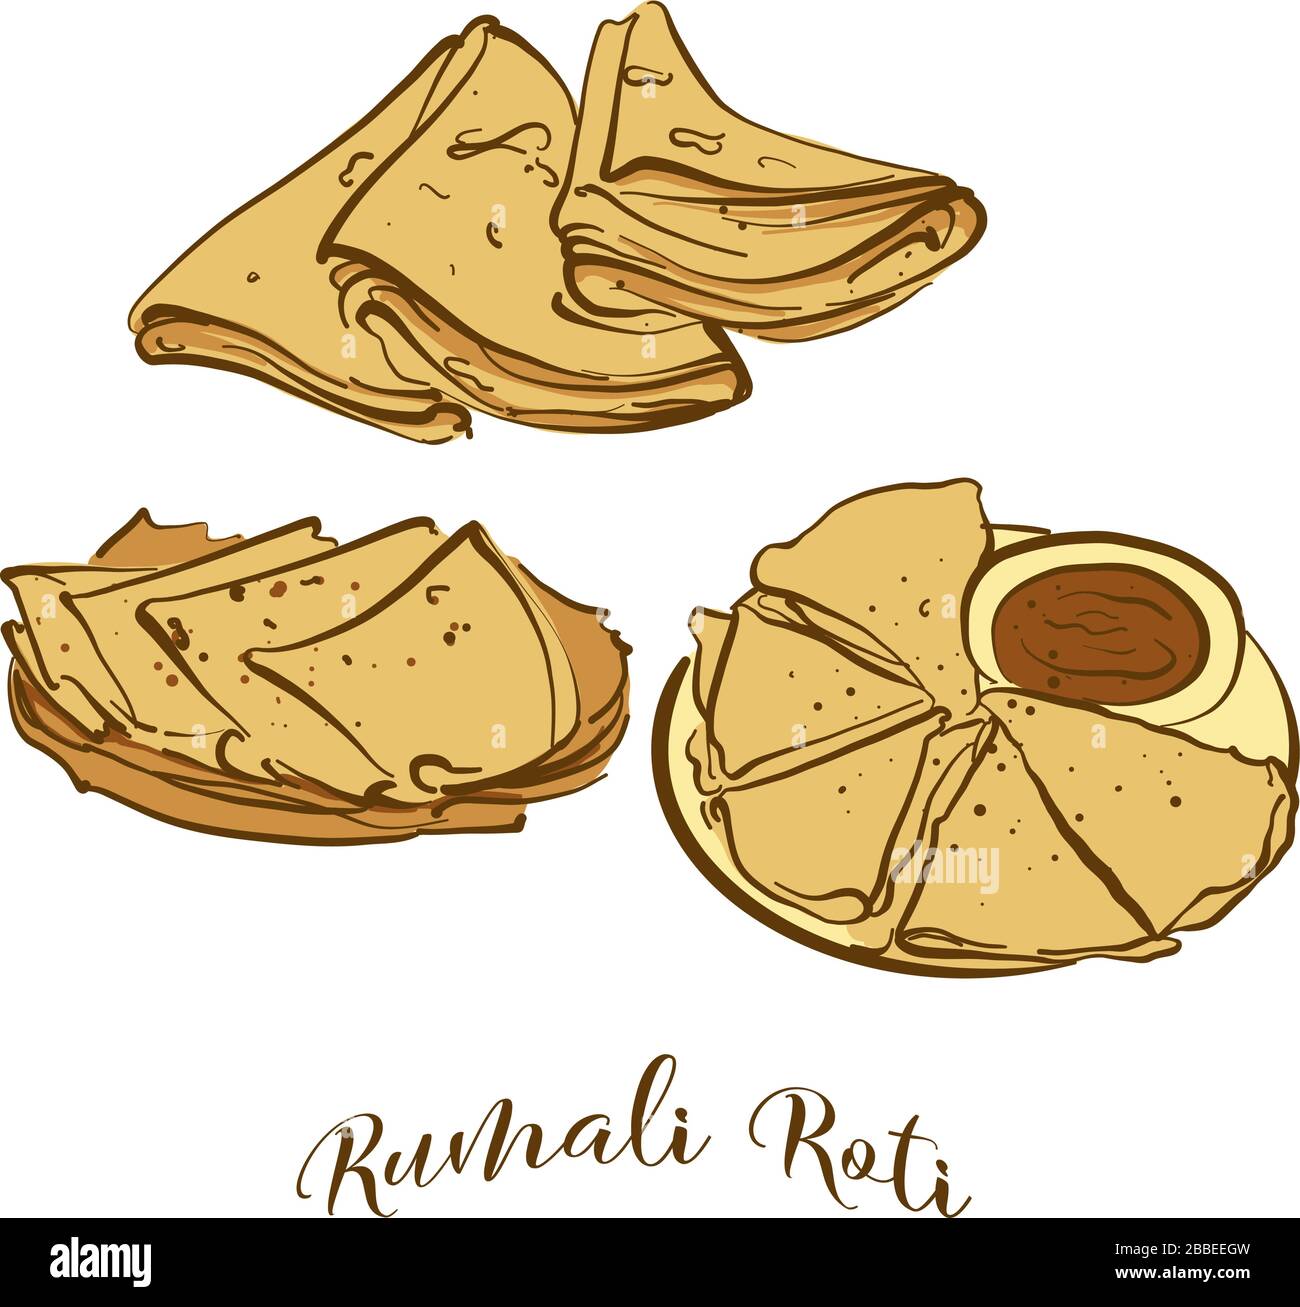 Colored drawing of Rumali Roti bread. Vector illustration of Flatbread food, usually known in India. Colored Bread sketches. Stock Vector